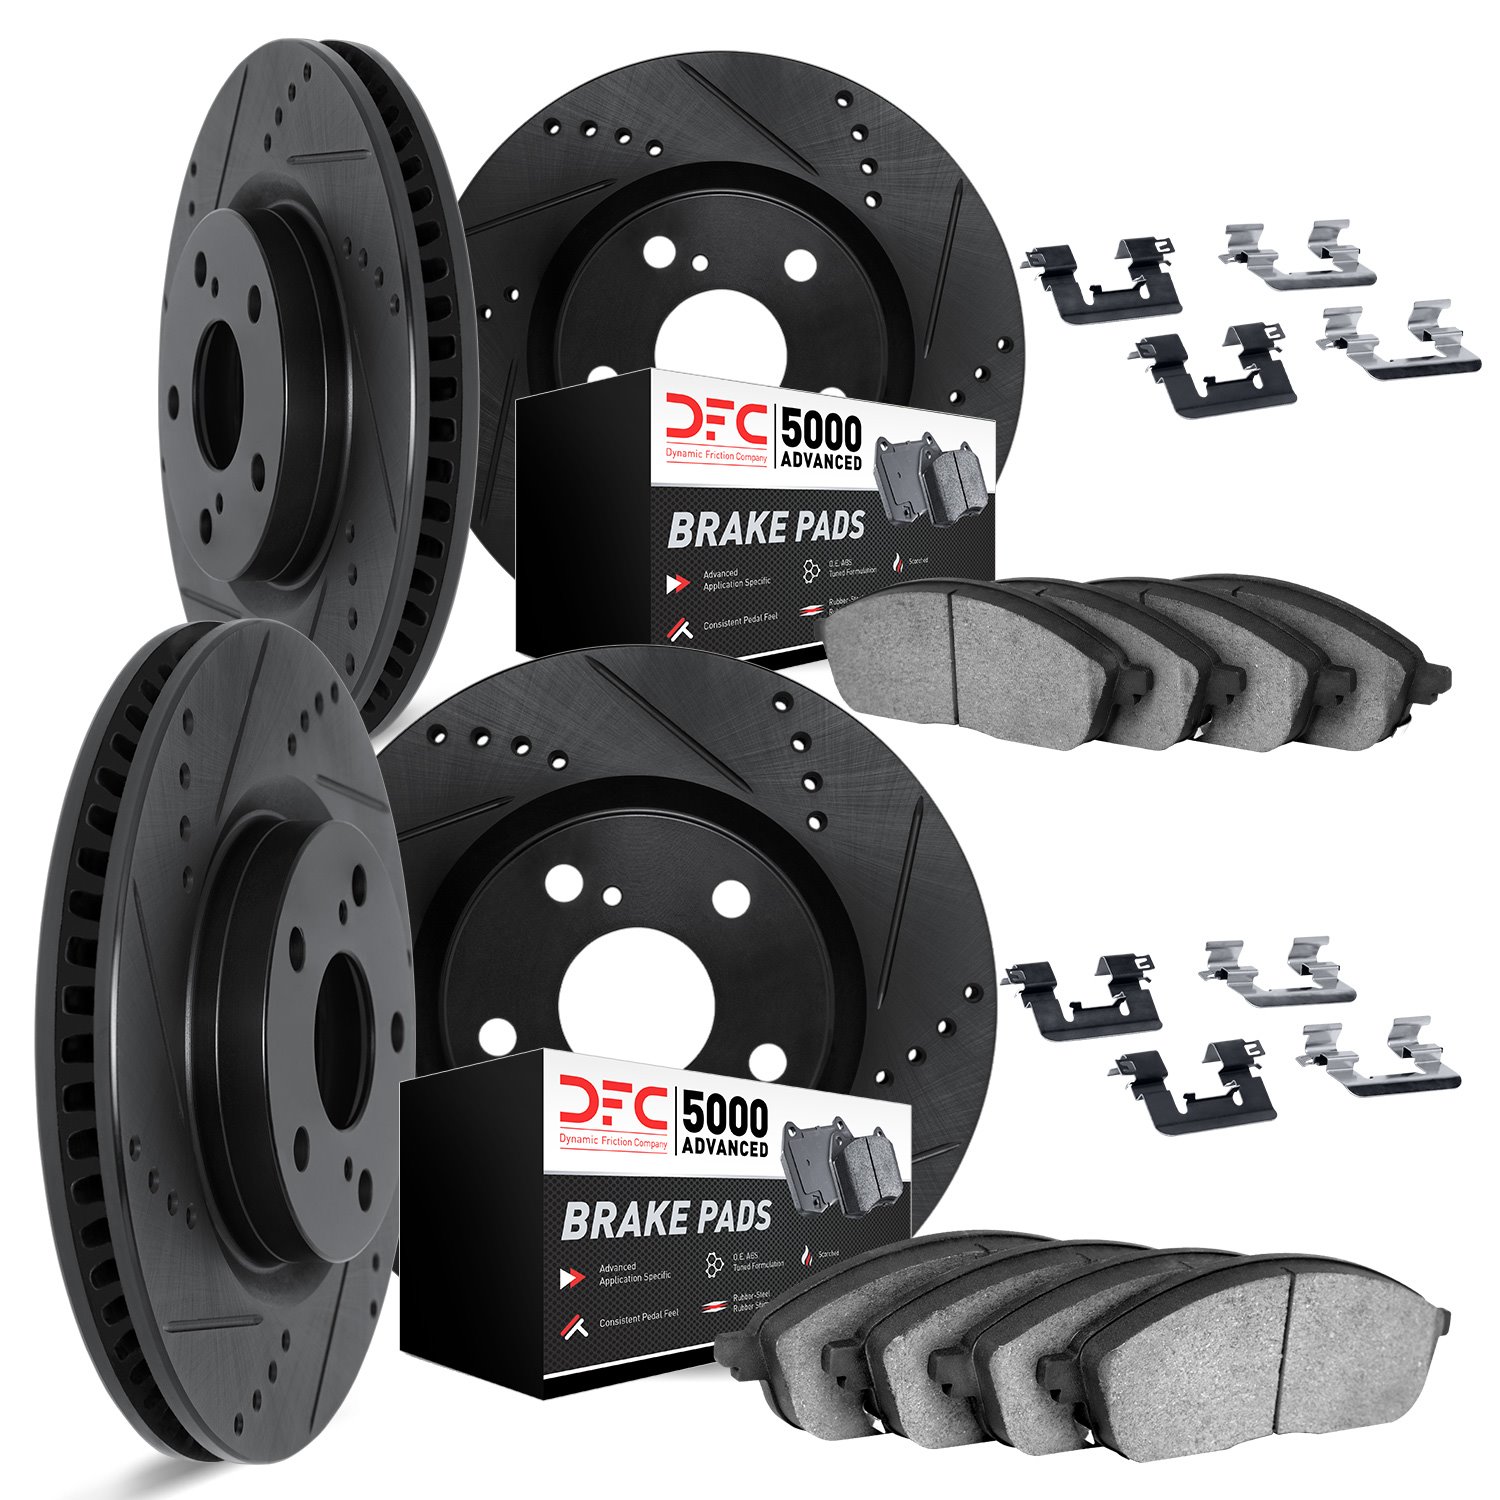 8514-31049 Drilled/Slotted Brake Rotors w/5000 Advanced Brake Pads Kit & Hardware [Black], 2017-2019 BMW, Position: Front and Re